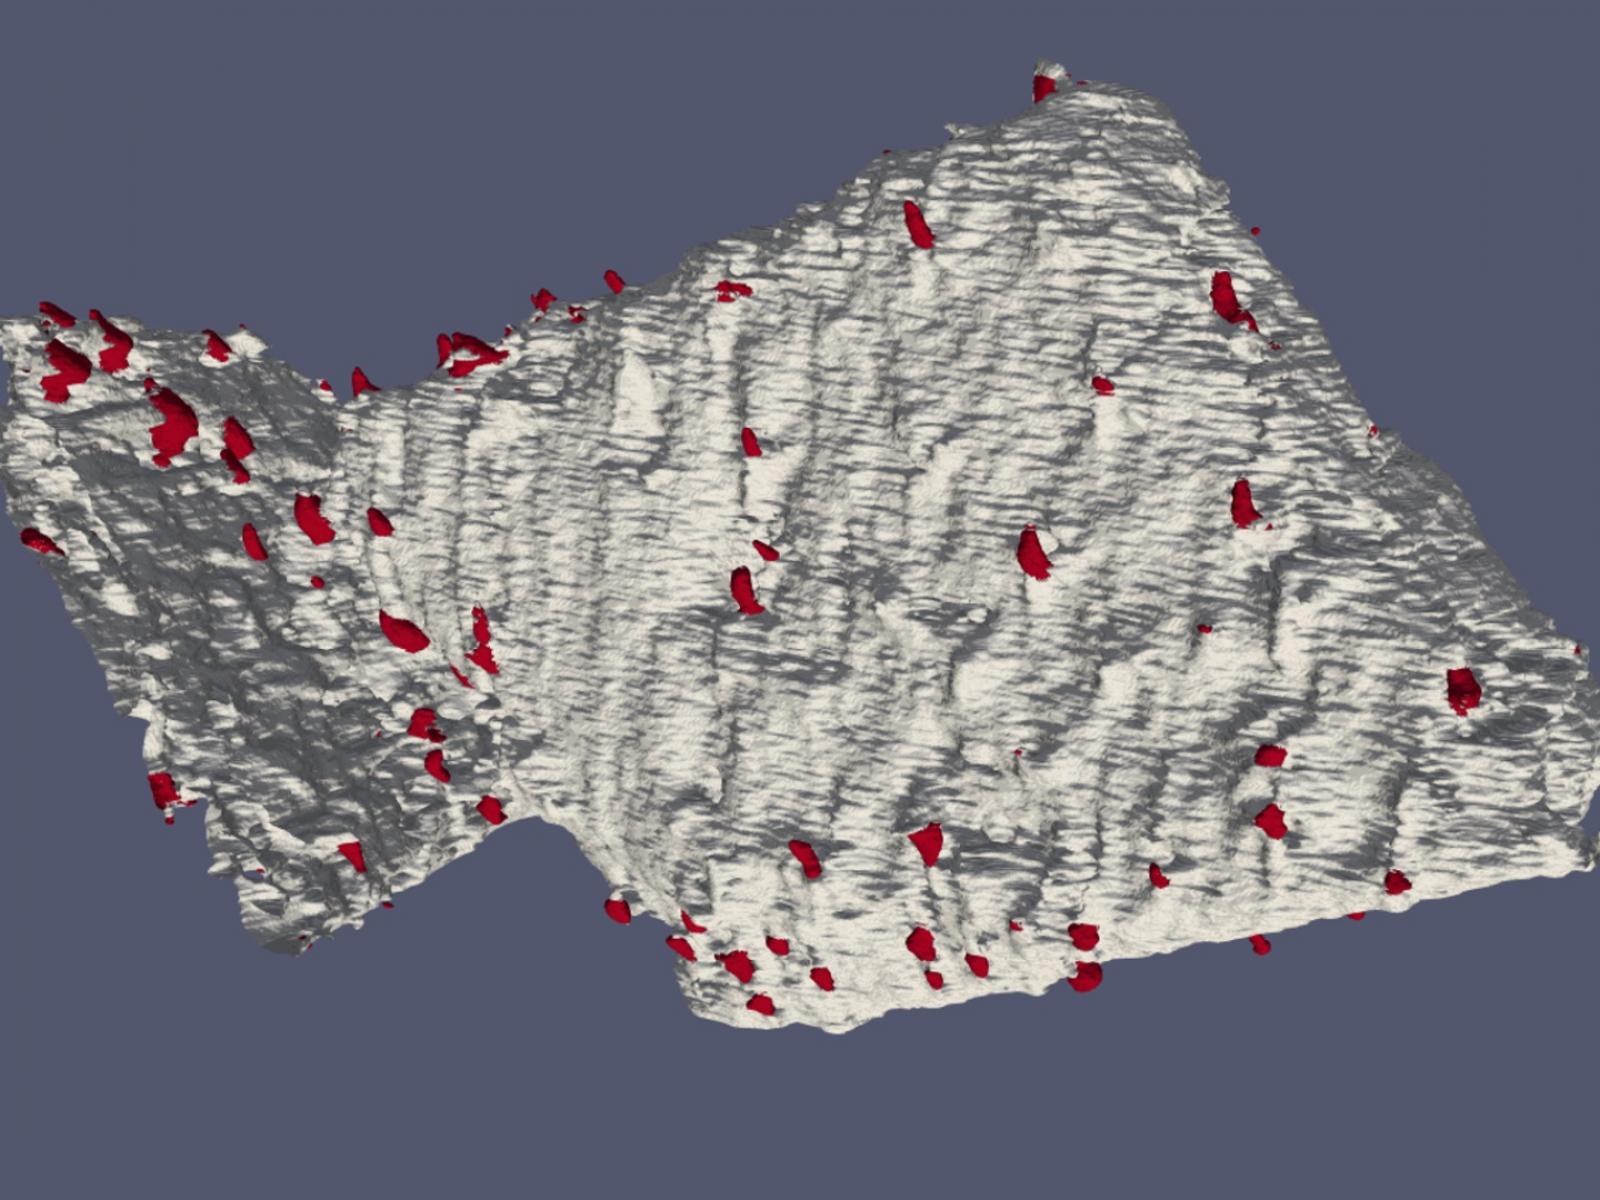 Assembled 3D tomogram image of platinum nanoparticles, colored red, on gray colored alumina support.